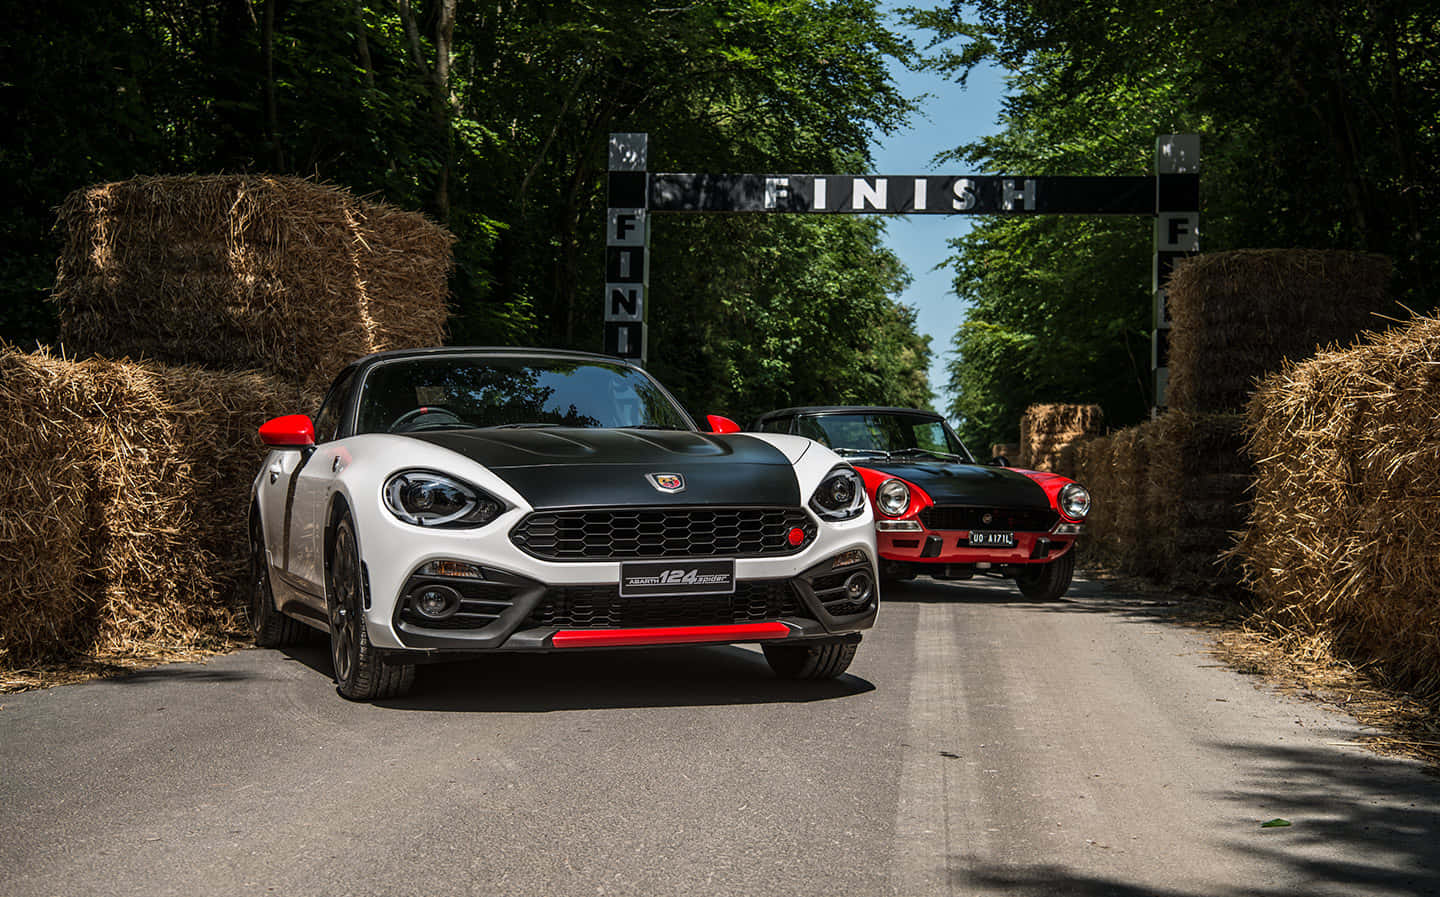 Caption: A Sleek Fiat 124 Spider in a Scenic Countryside Wallpaper